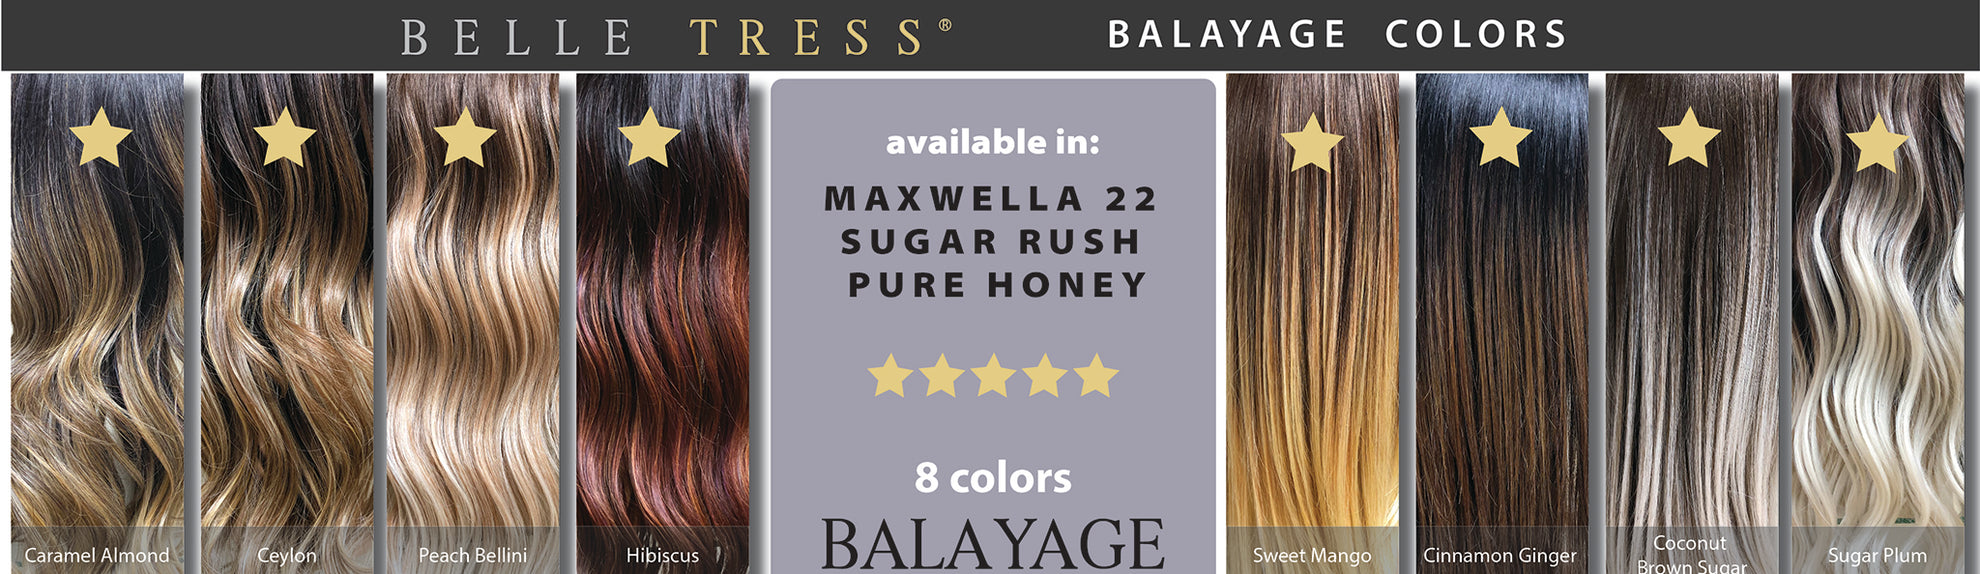 BELLE TRESS BALAYAGE COLLECTION